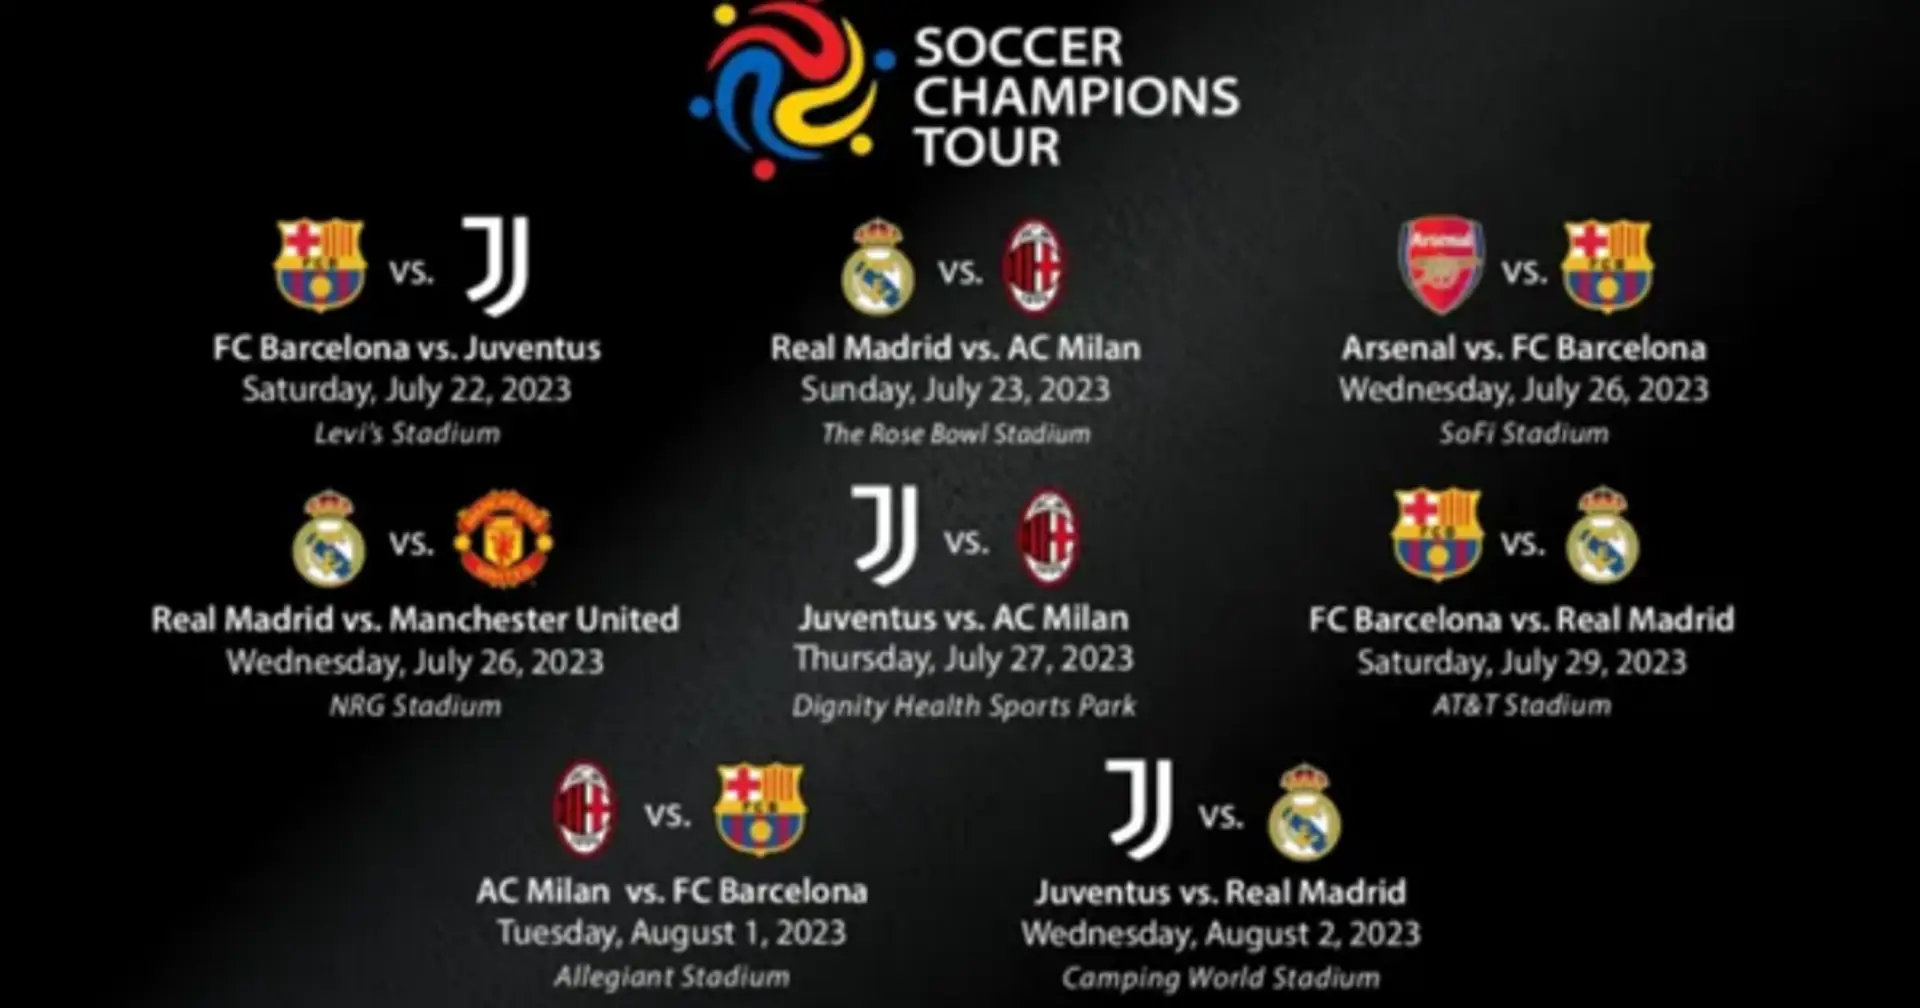 The USA Hosts Manchester United & Other Major European Teams in the 2023 Soccer Champions Tour 